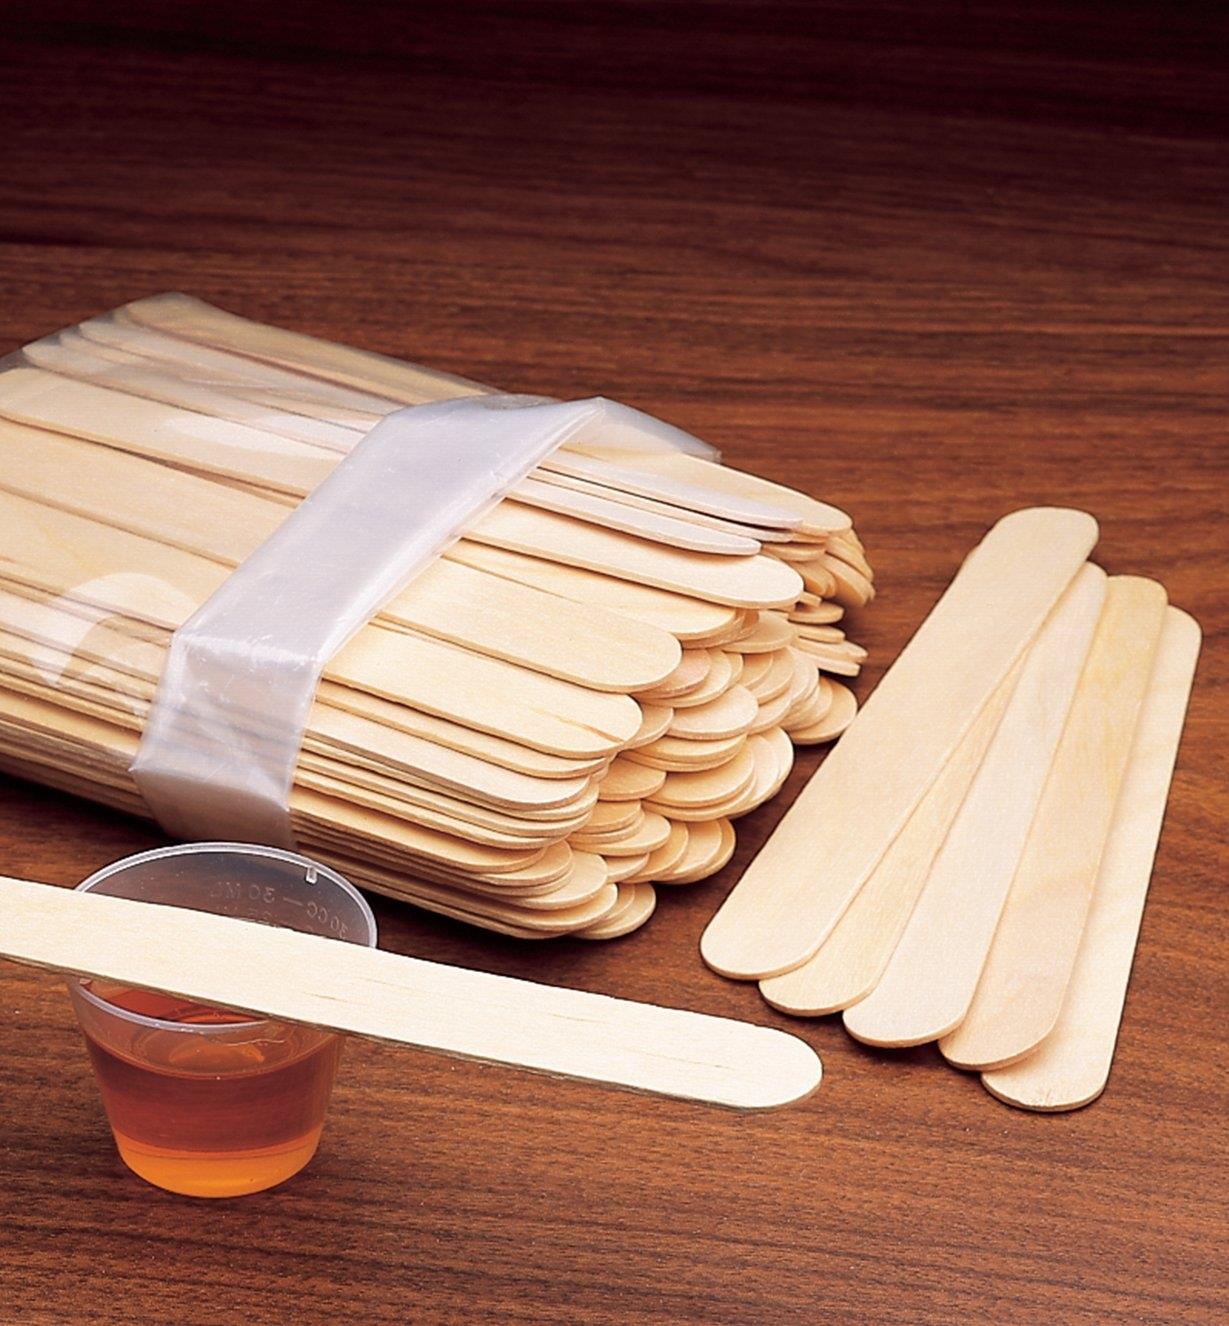 Package of Tongue Depressors on a table with a small cup of stain